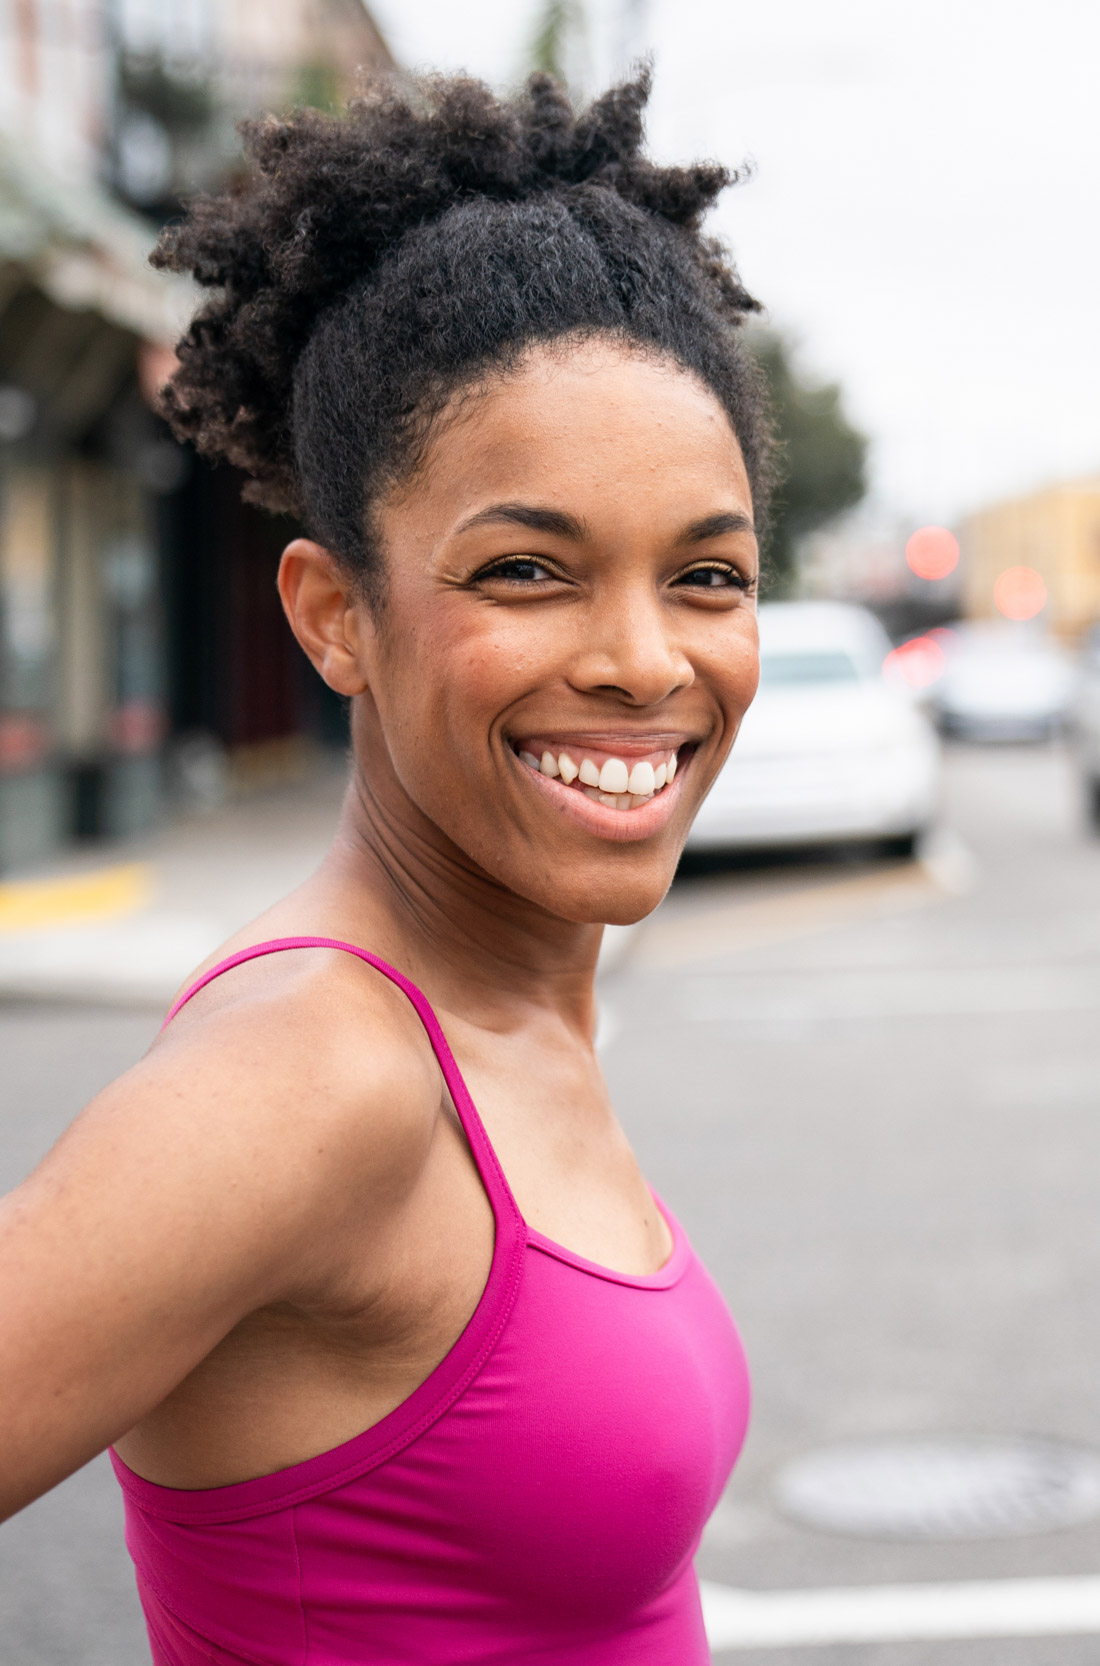 A female dancer wearing leotard smiling on a street in New Orleans